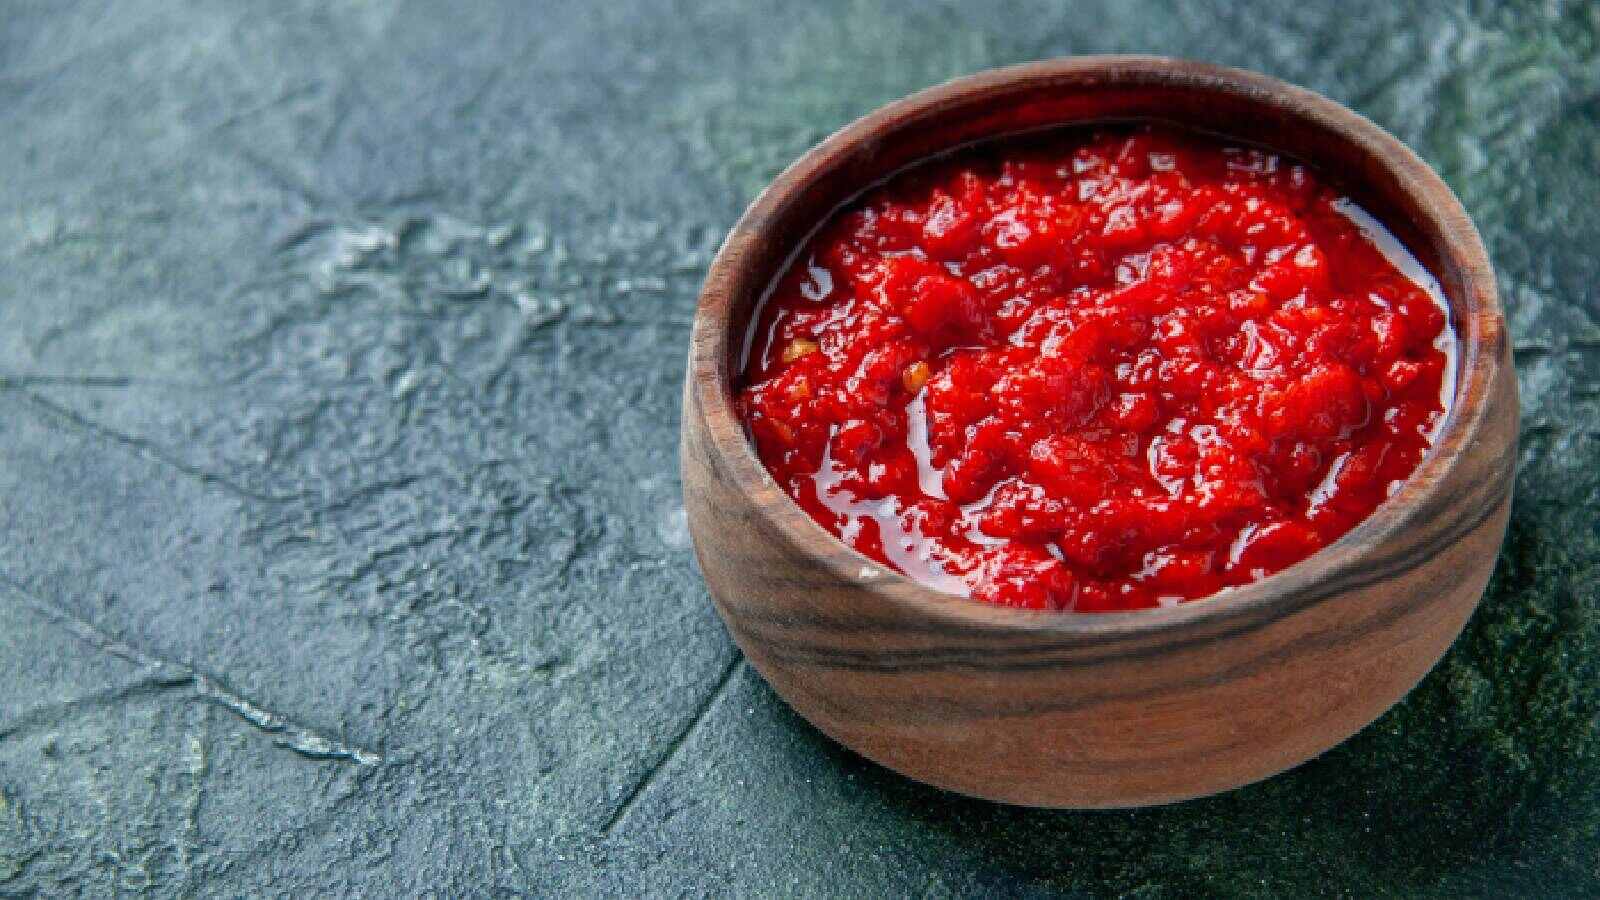 Red Ant Chutney: Health benefits of chutney with a GI tag